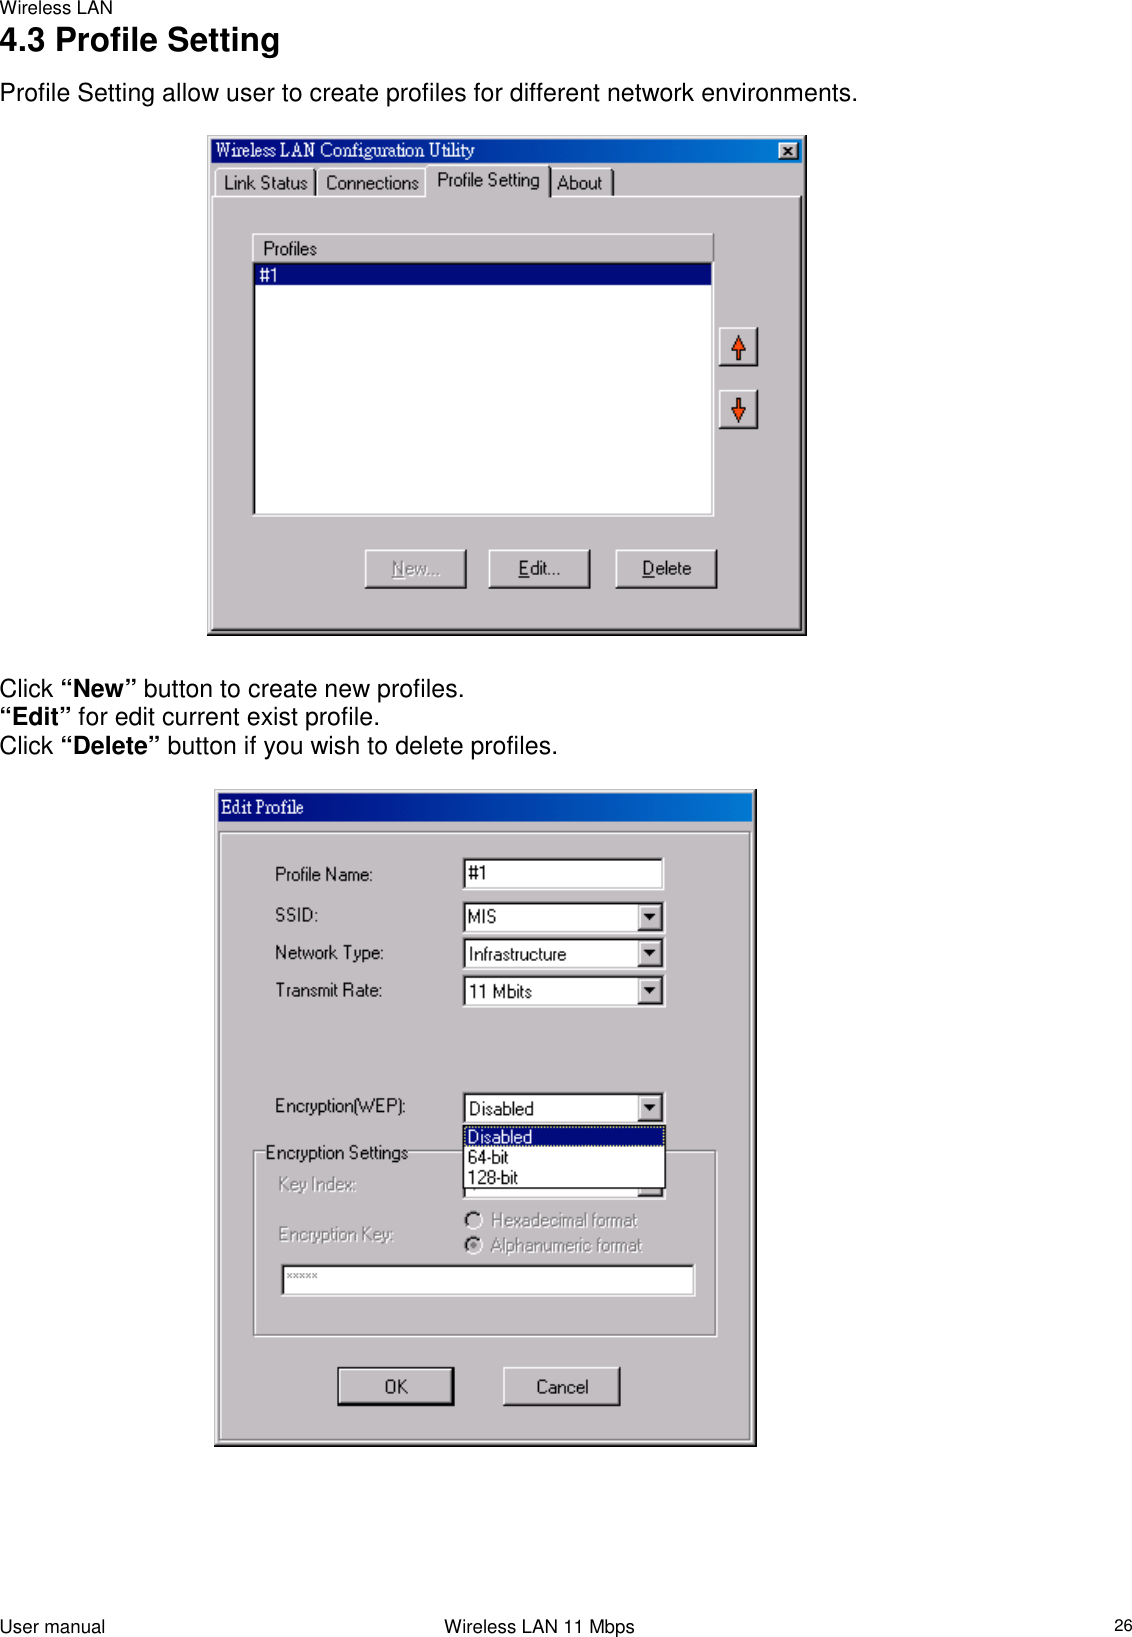 Wireless LANUser manual                                                                 Wireless LAN 11 Mbps264.3 Profile SettingProfile Setting allow user to create profiles for different network environments.                                Click “New” button to create new profiles.“Edit” for edit current exist profile.Click “Delete” button if you wish to delete profiles.                                     